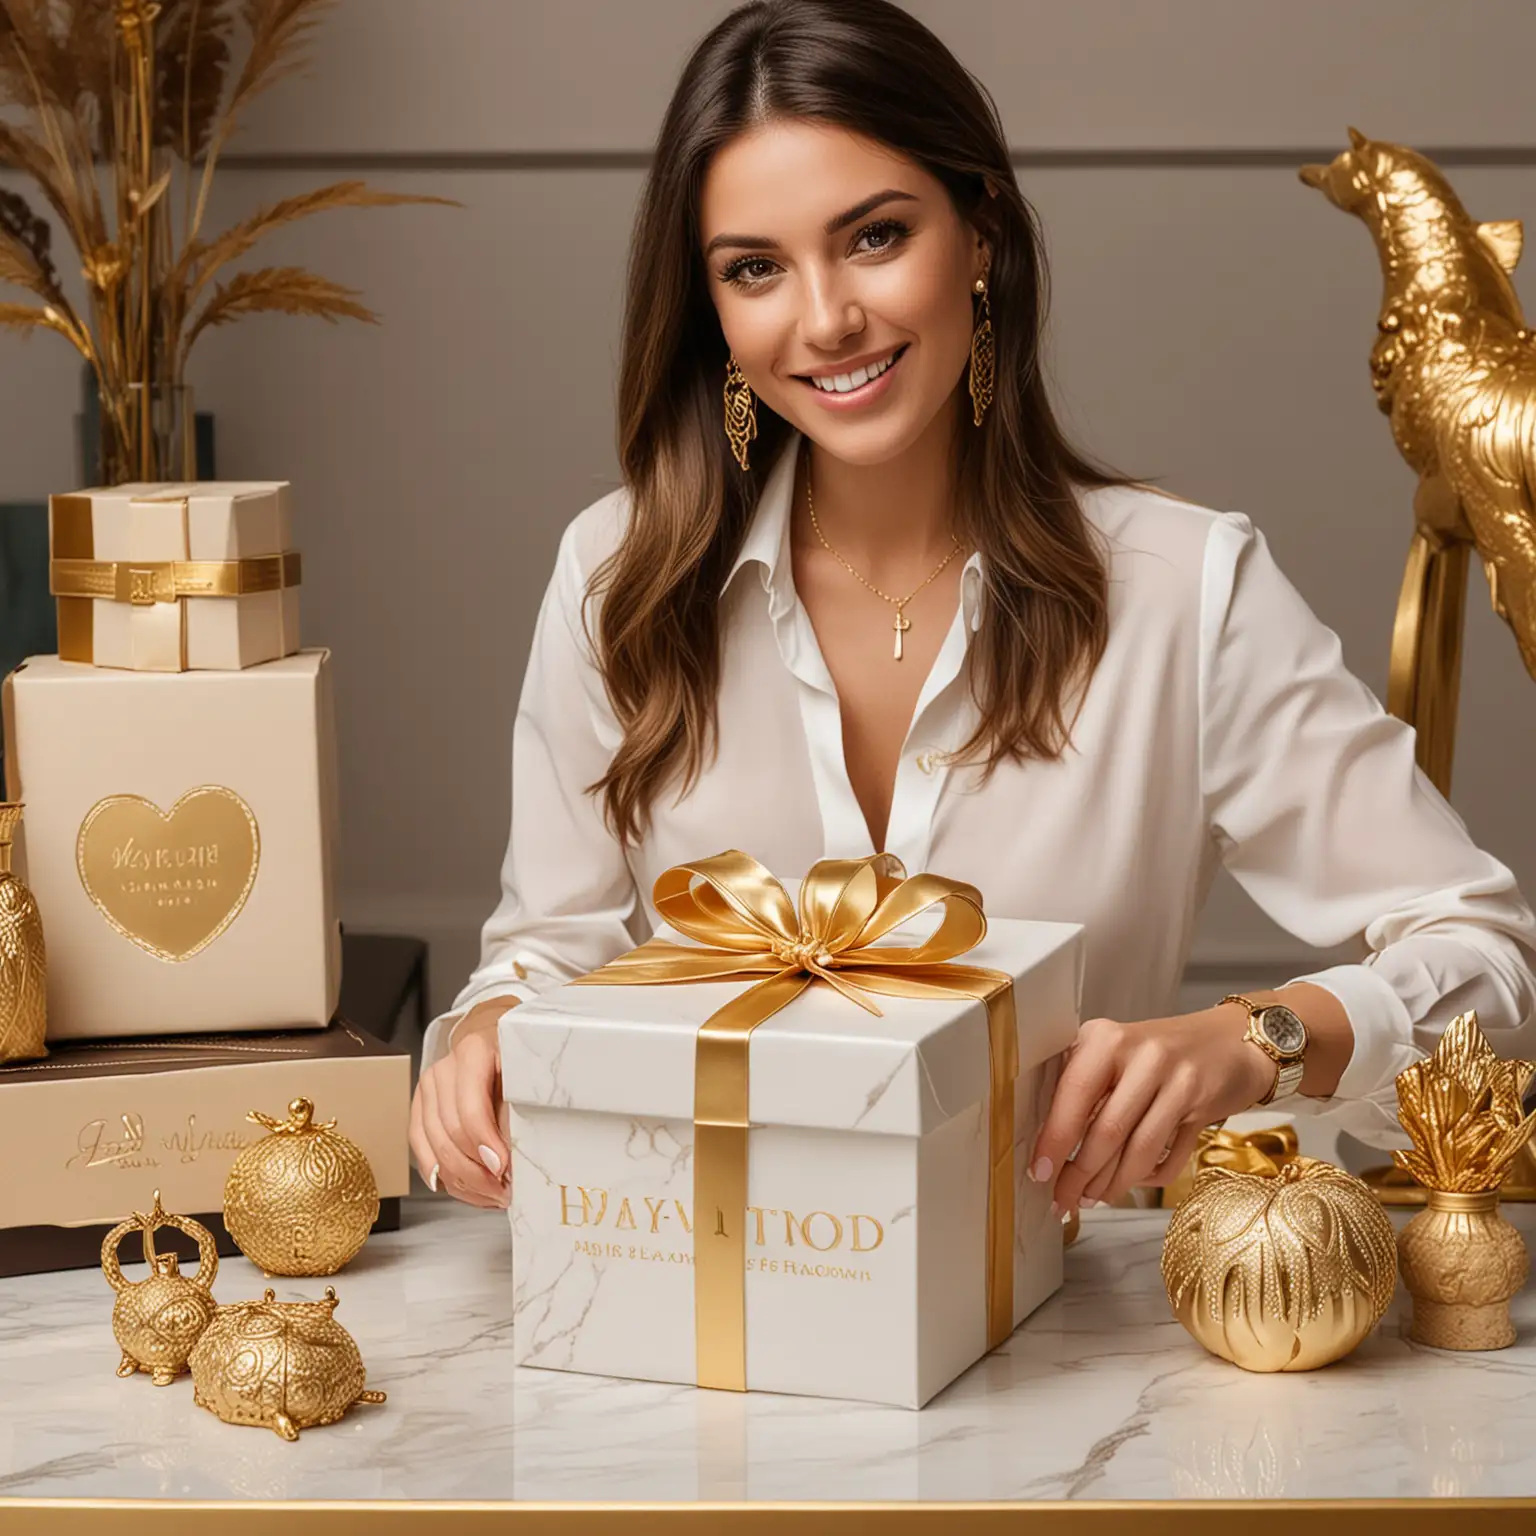 luxury and unique personalized gifts and buyer in happy and luxurious atmosphere